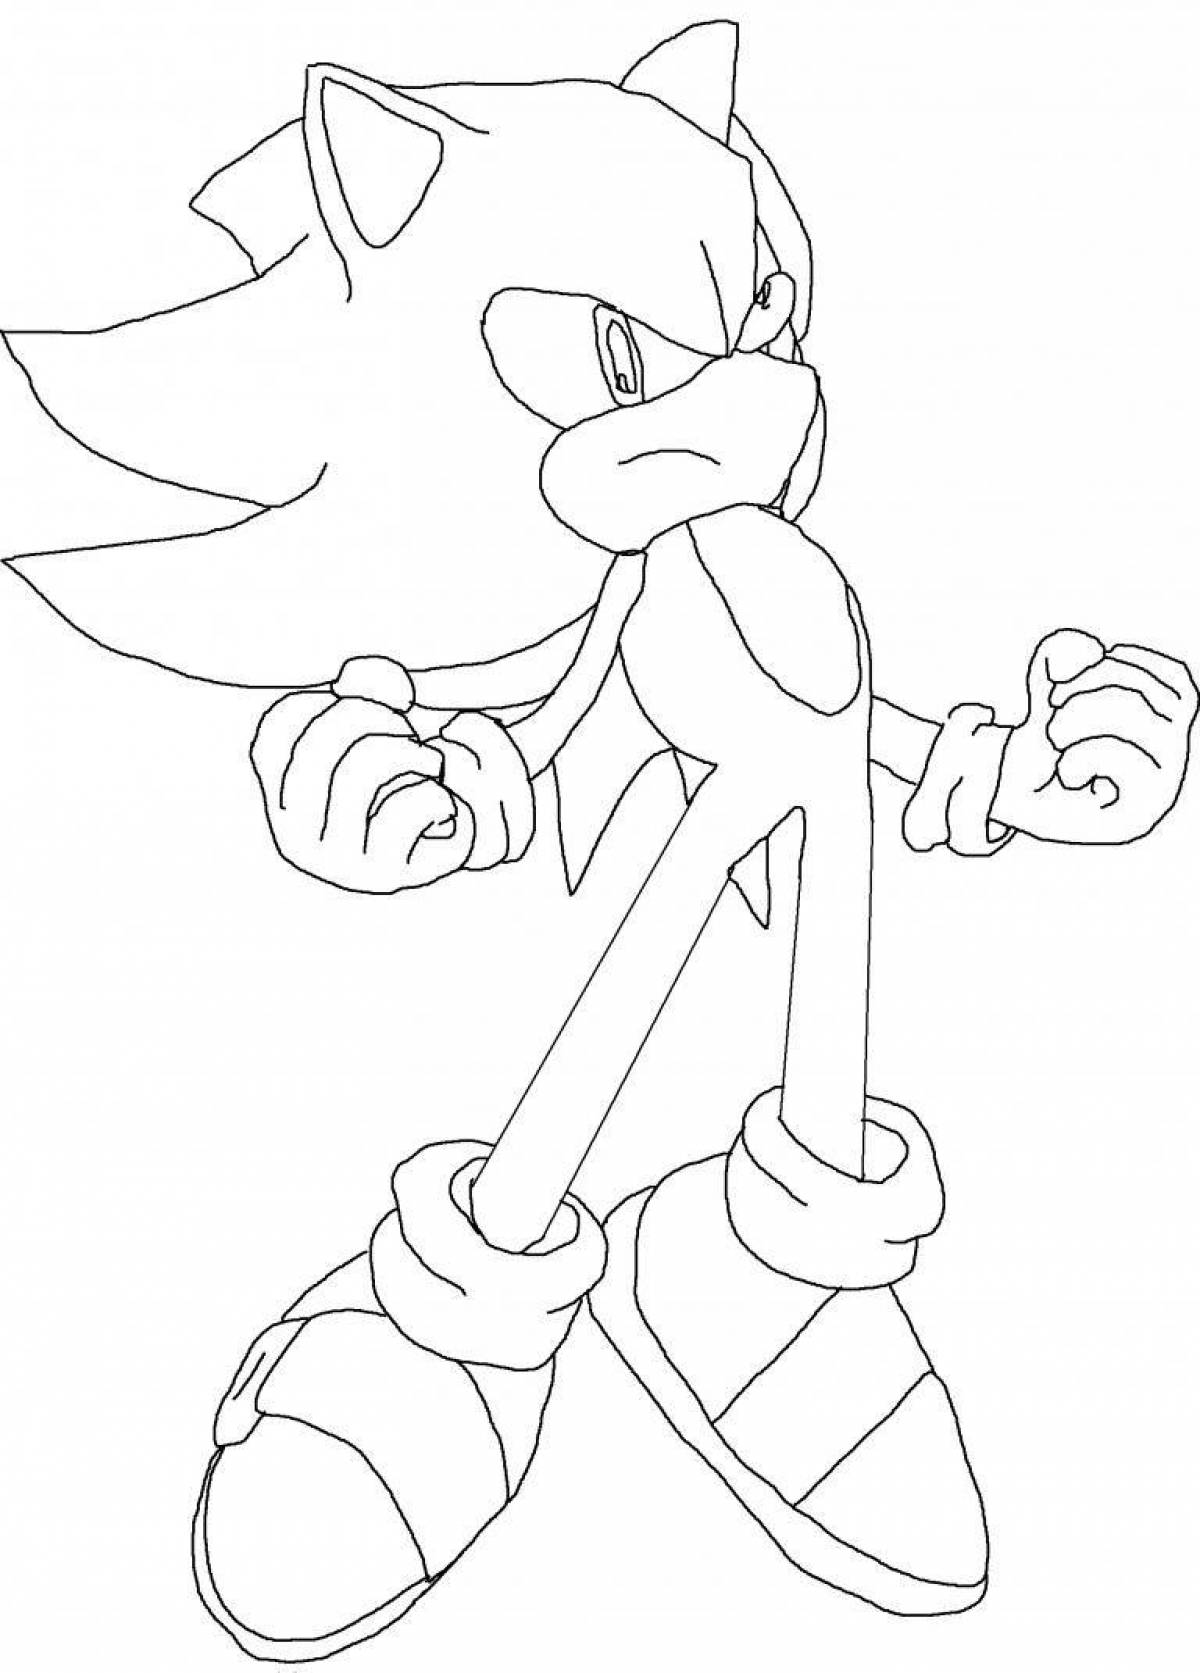 Super sonic glowing coloring book